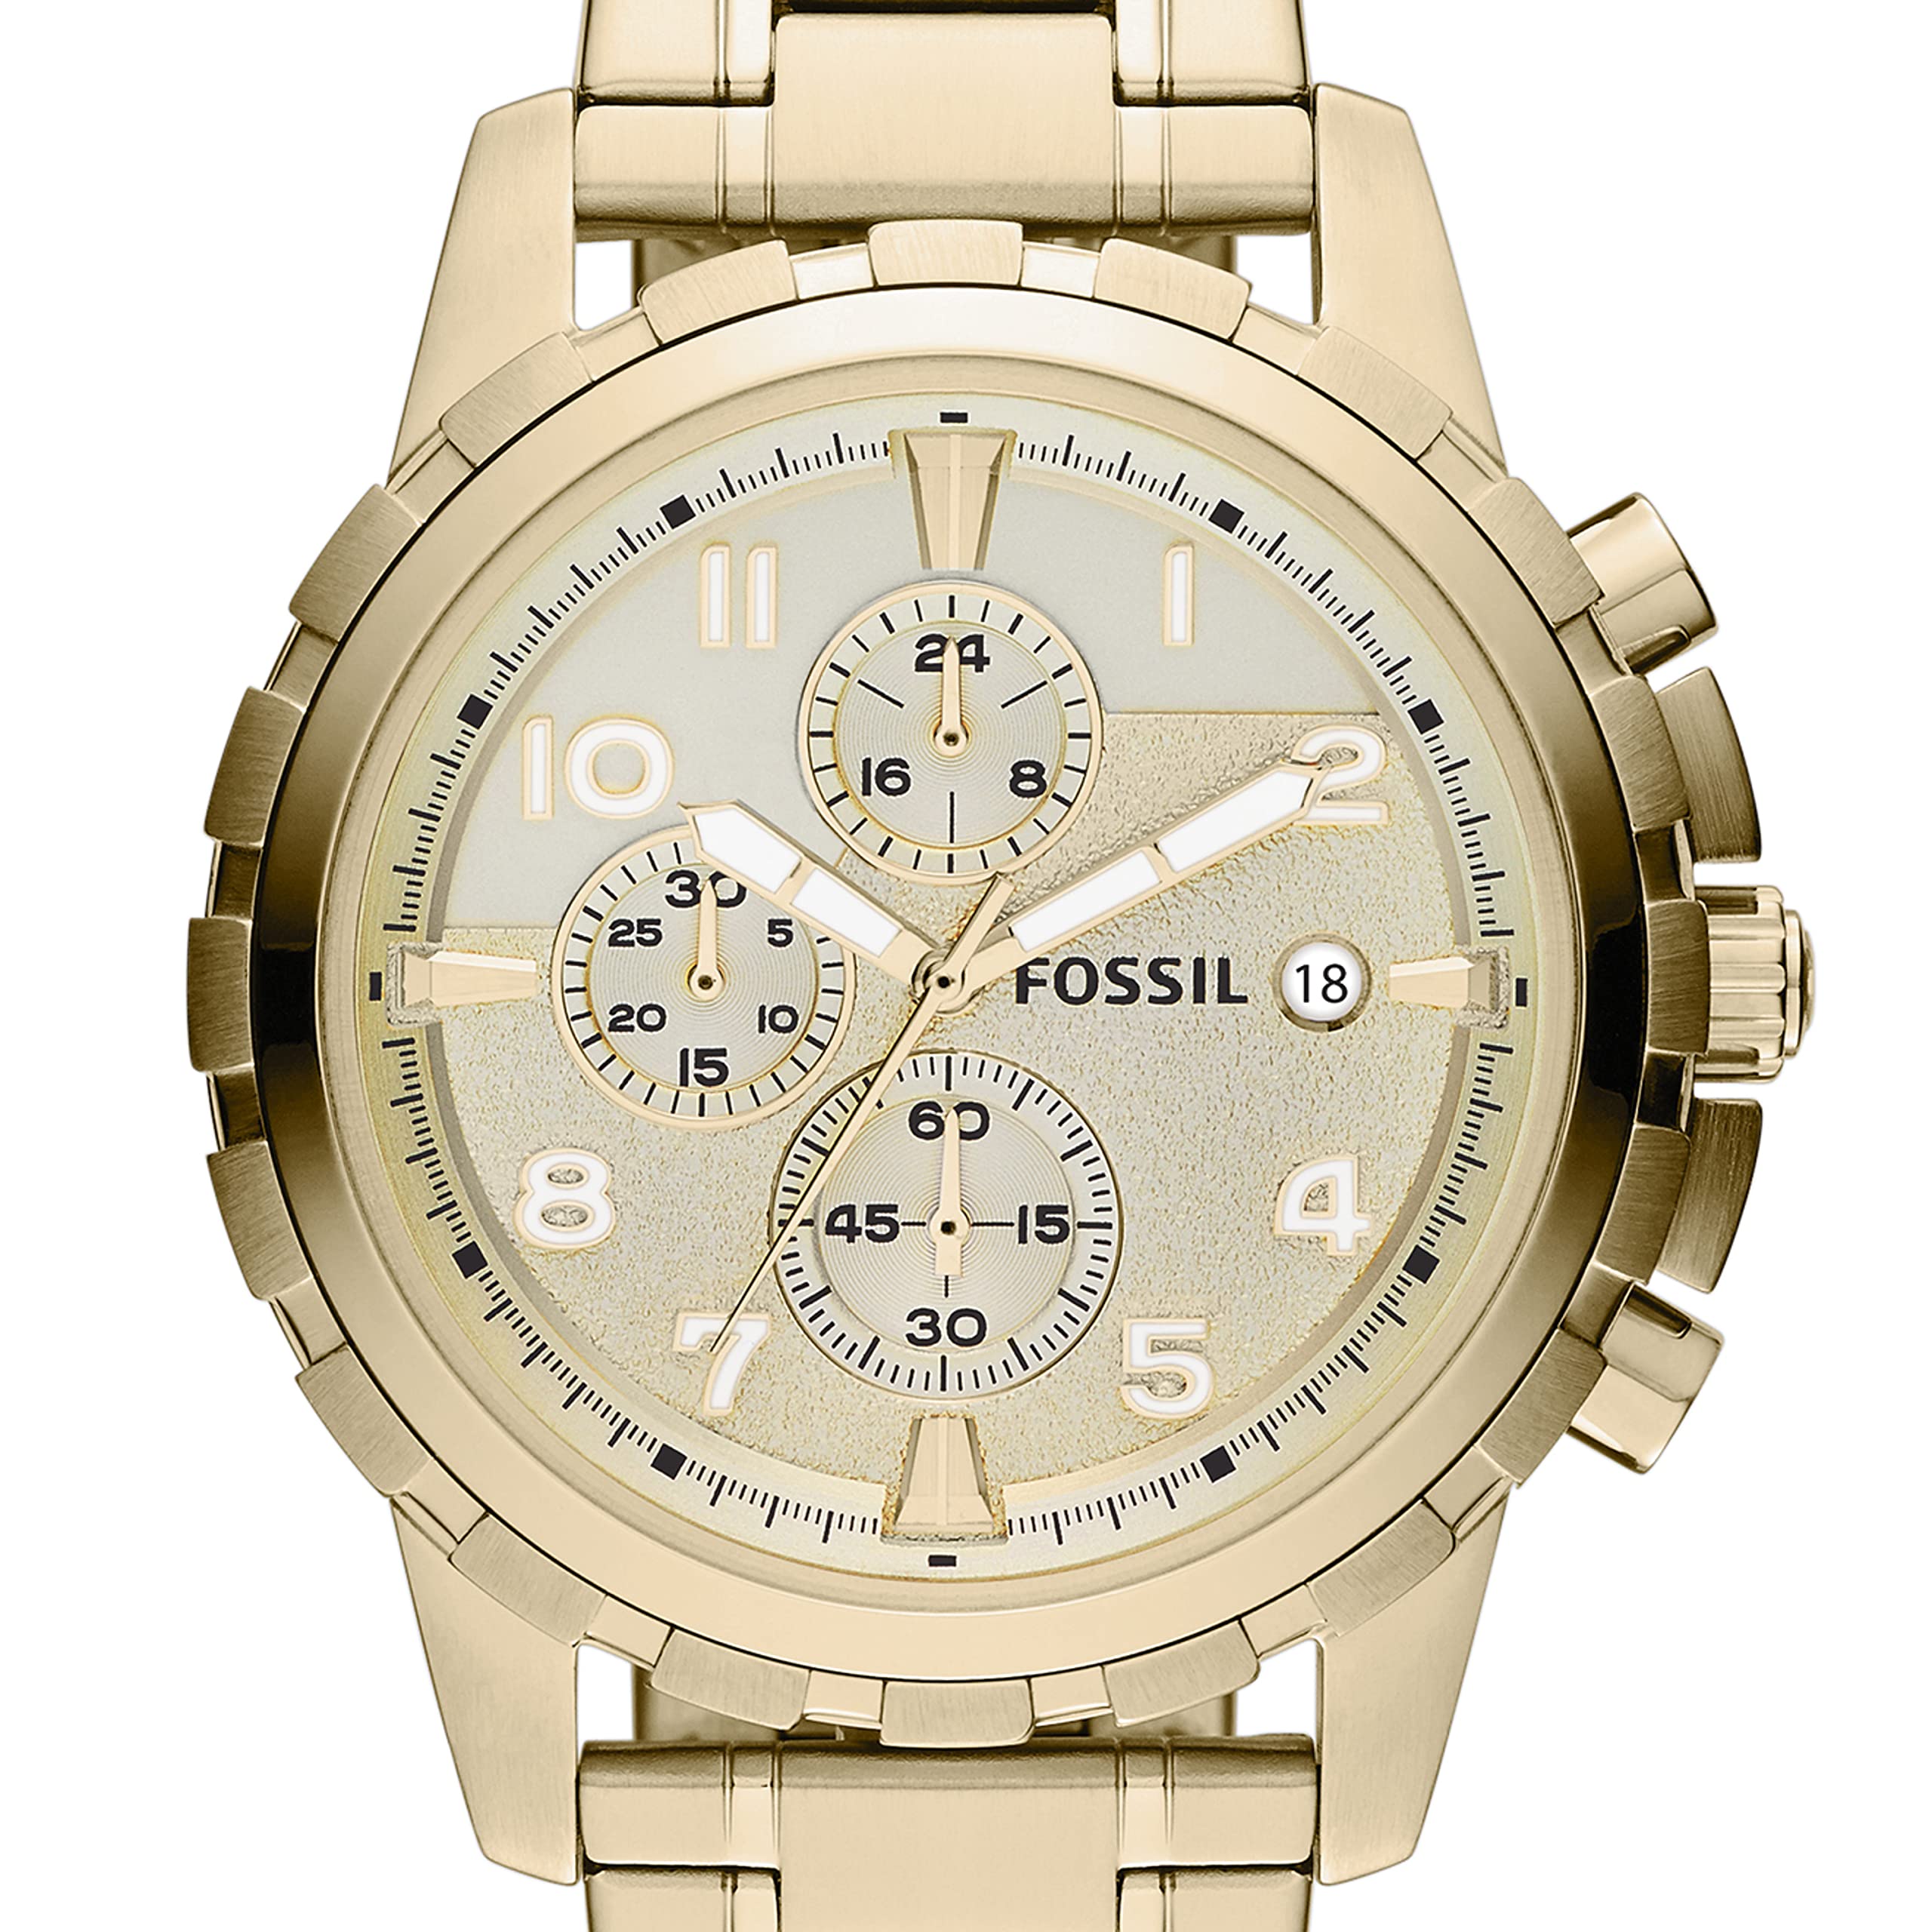 Fossil Men's Dean Stainless Steel Quartz Dress Chronograph Watch (Gold) $34 + Free Shipping w/ Prime or on orders $35+